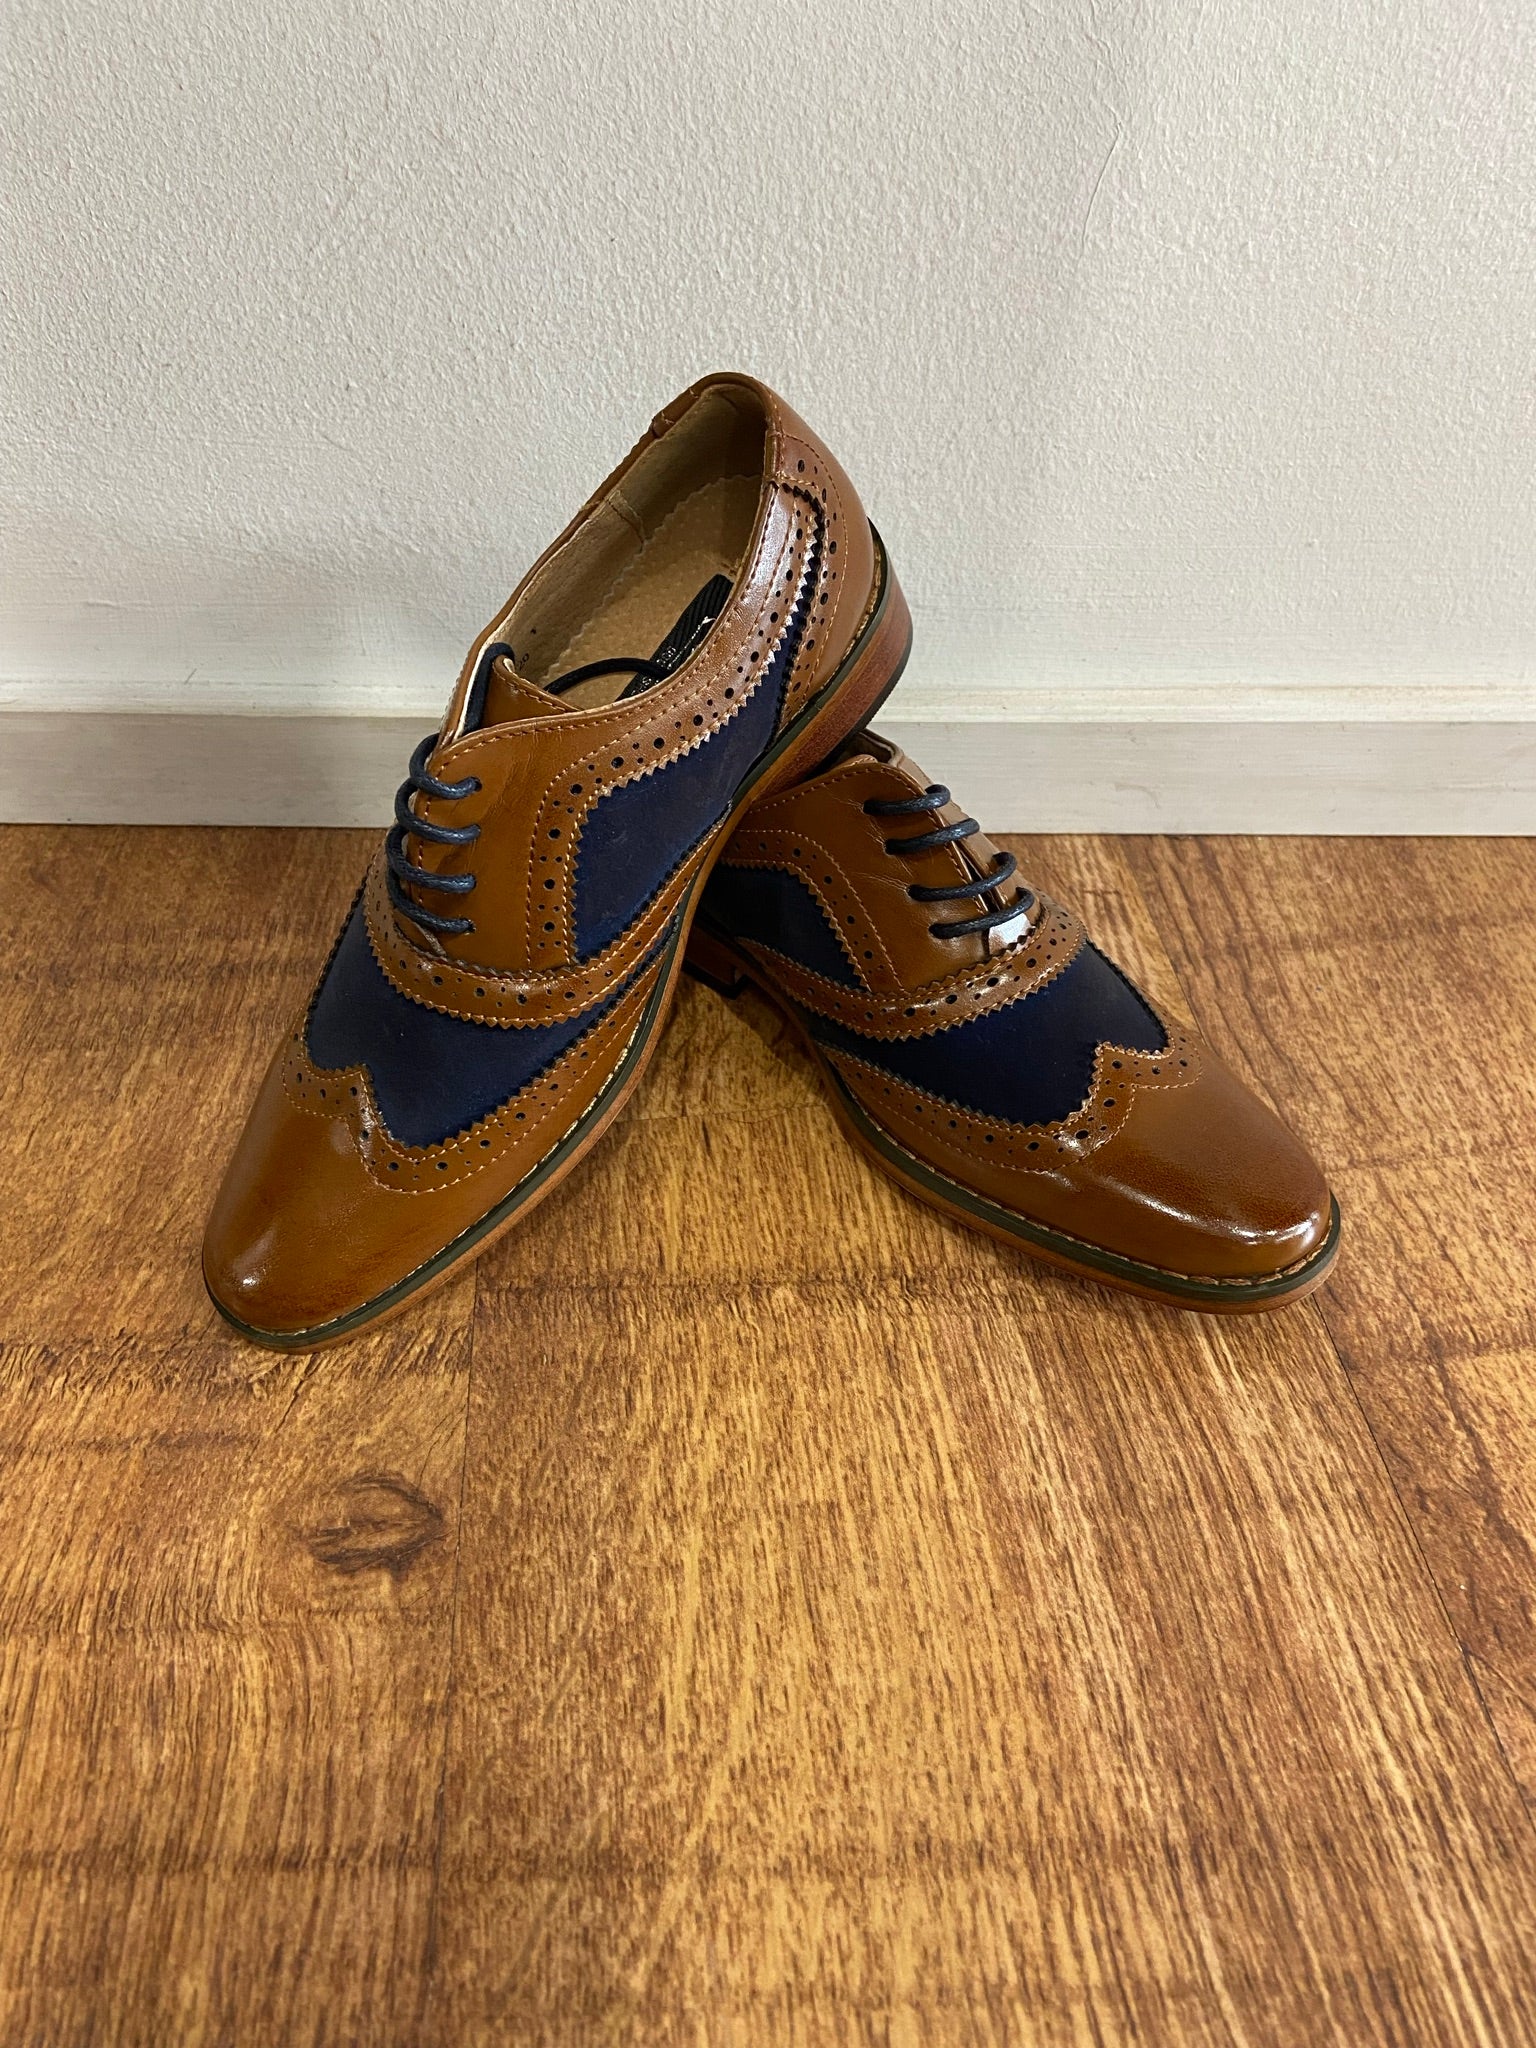 BOYS BROWN NAVY SHOES